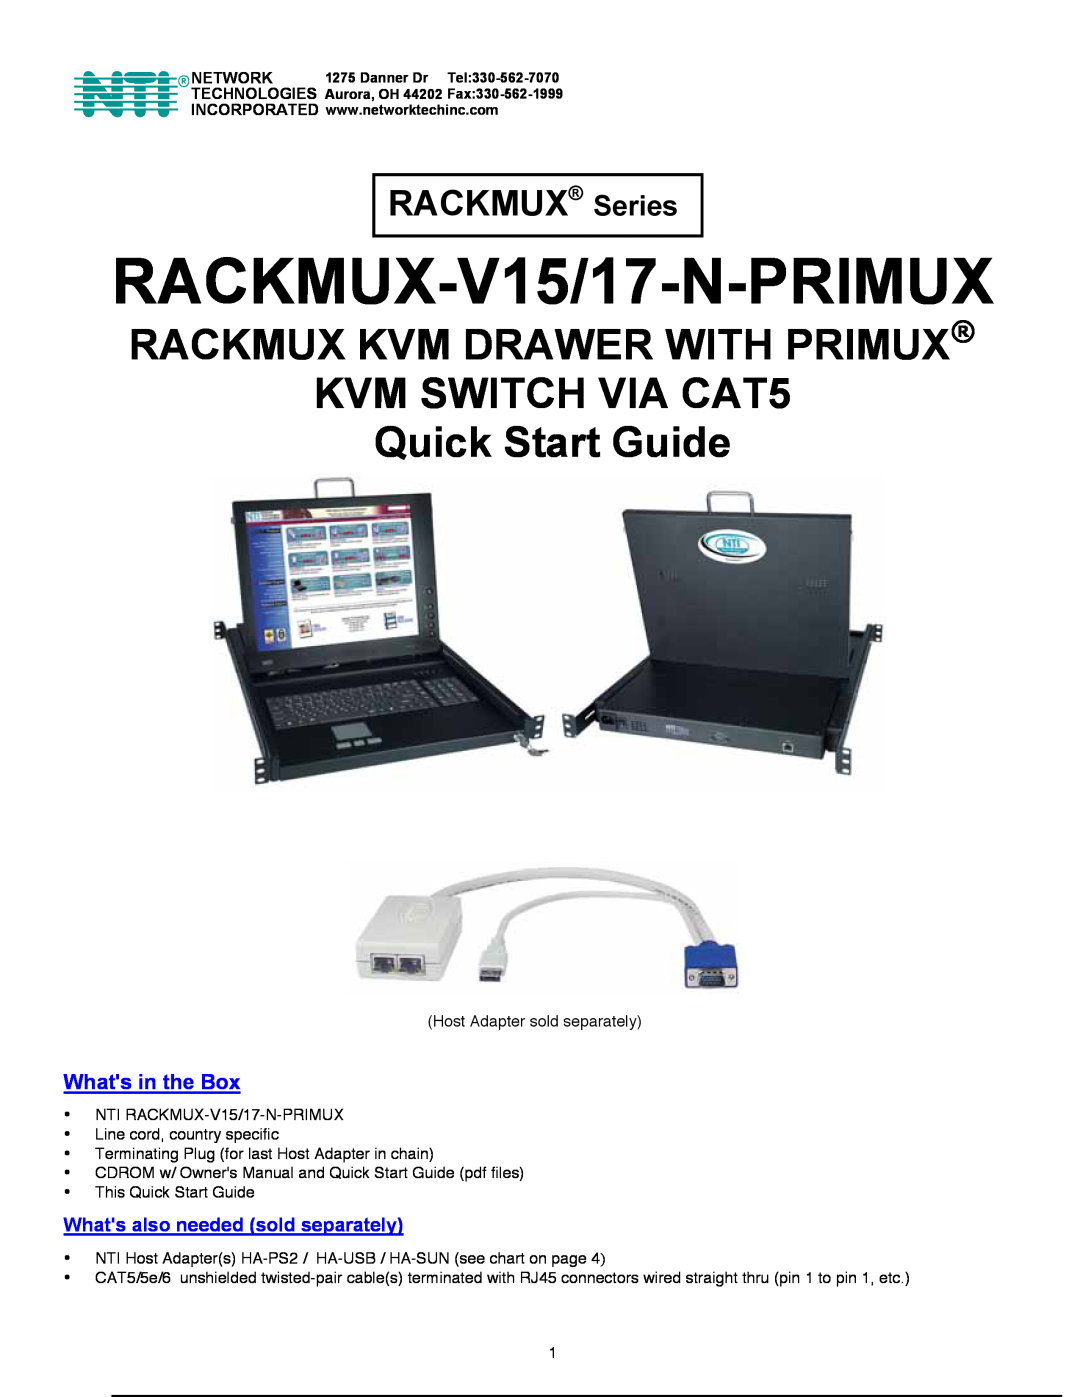 Network Technologies quick start Whats also needed sold separately, R Network, RACKMUX-V15/17-N-PRIMUX, RACKMUX Series 